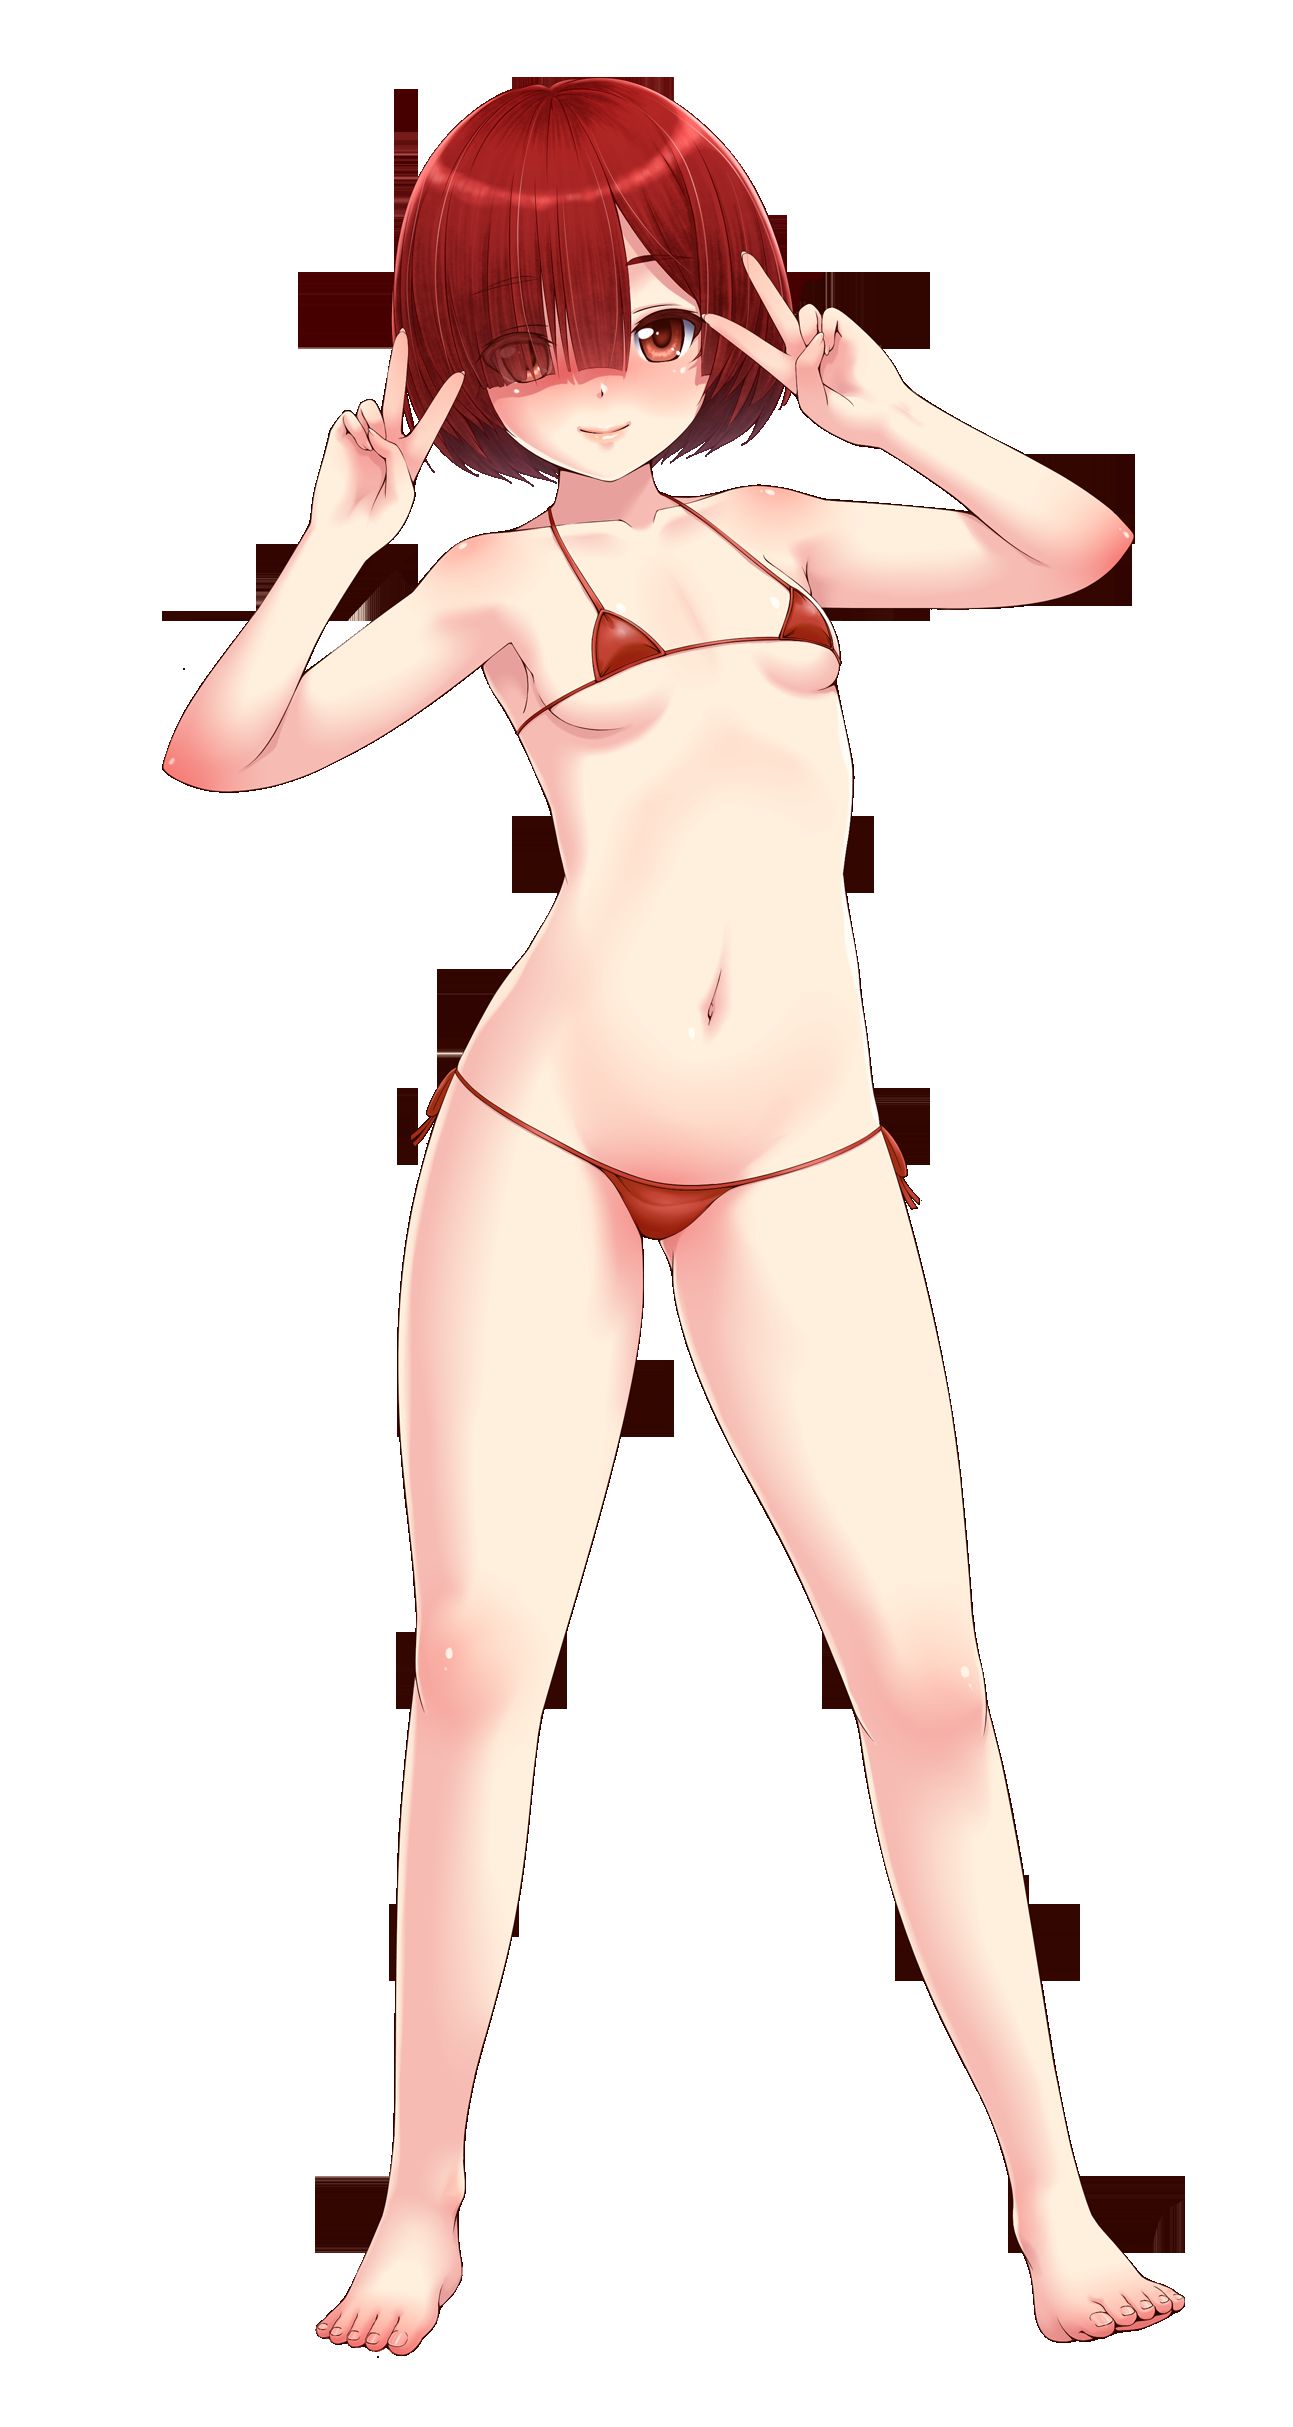 [Erotic photoshop Chara material] PNG background transparent erotic image material such as anime character that 254 73